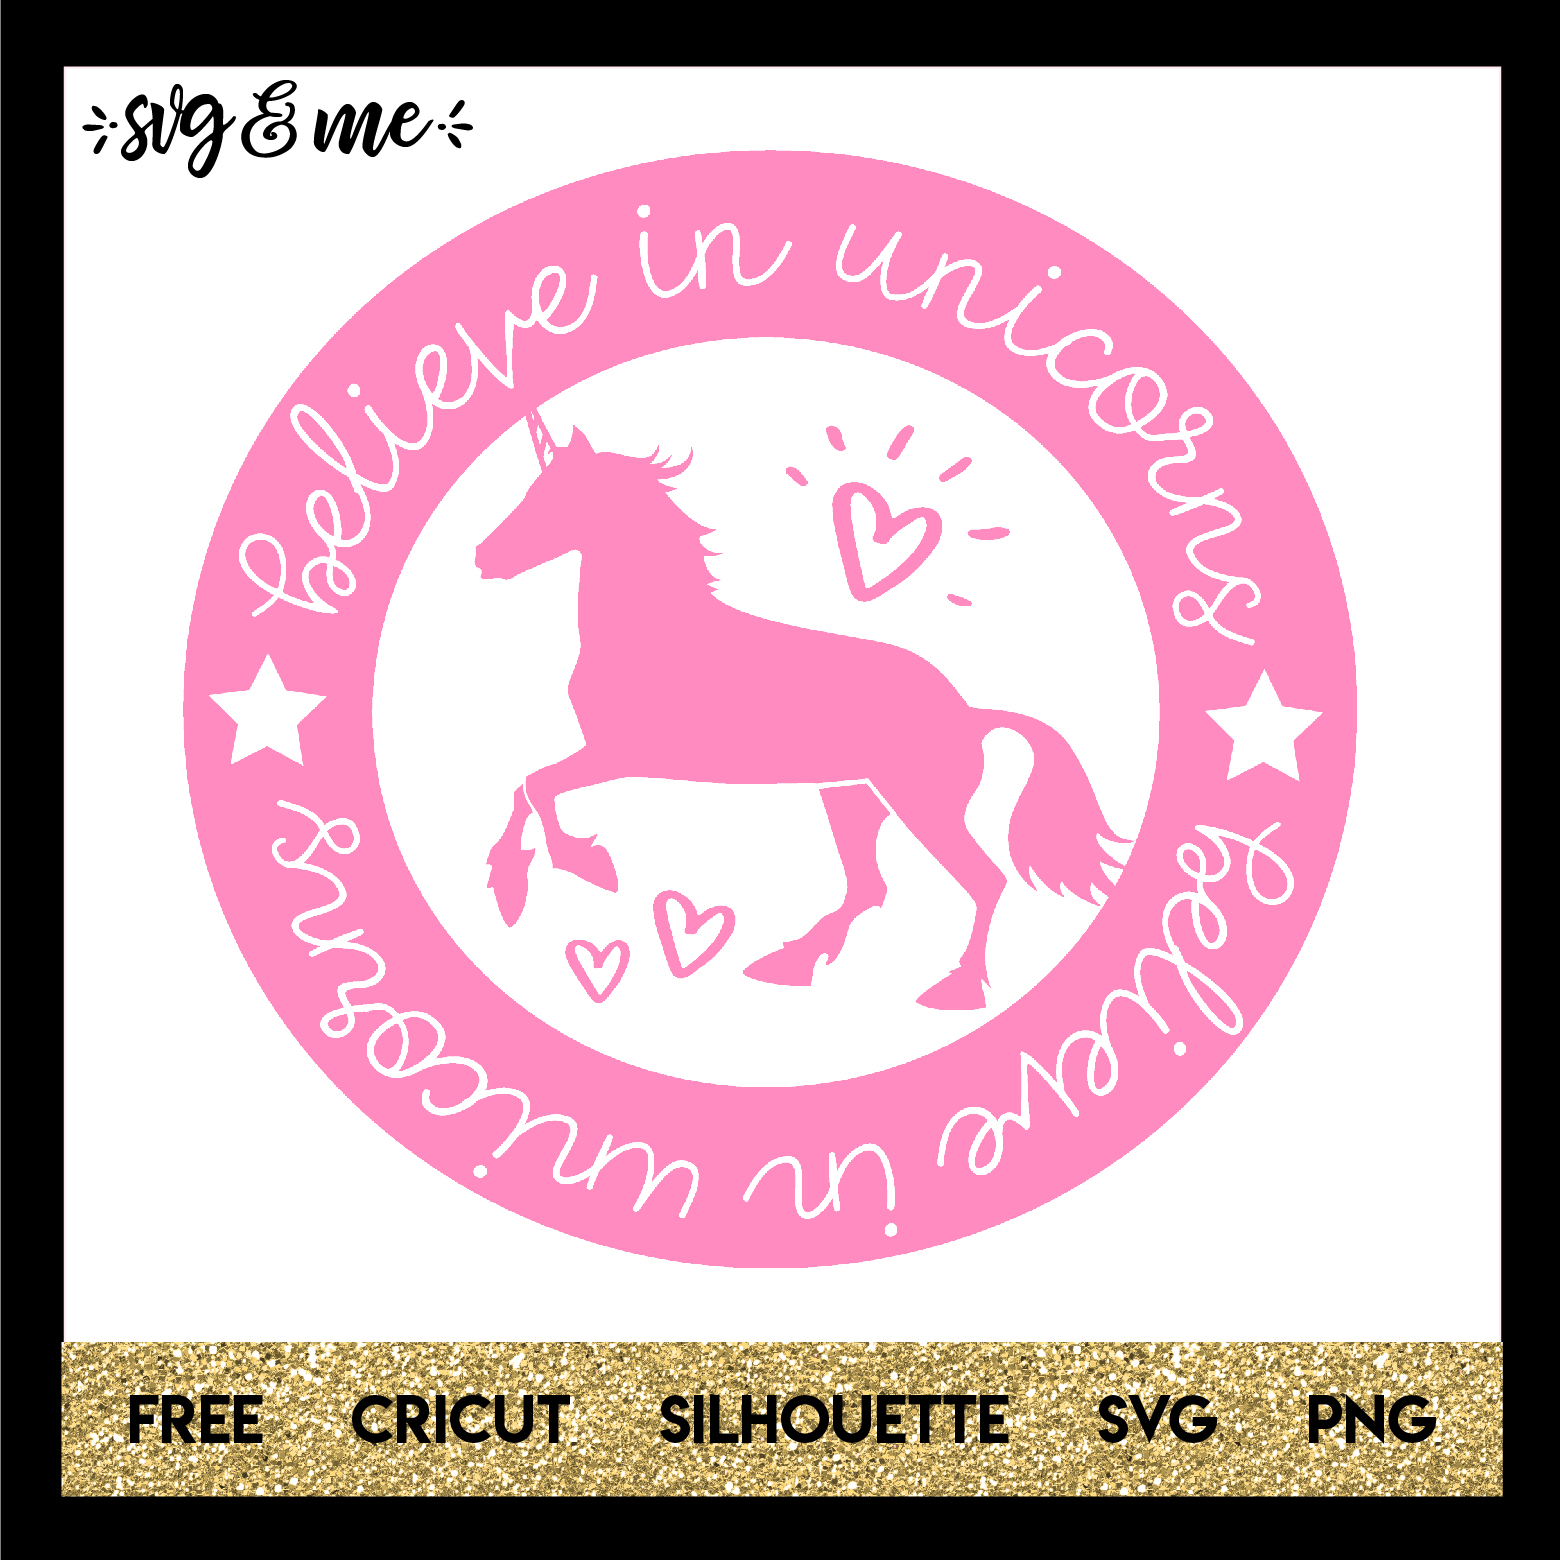 FREE SVG CUT FILE for Cricut and Silhouette DIY Projects - Believe in Unicorns SVG